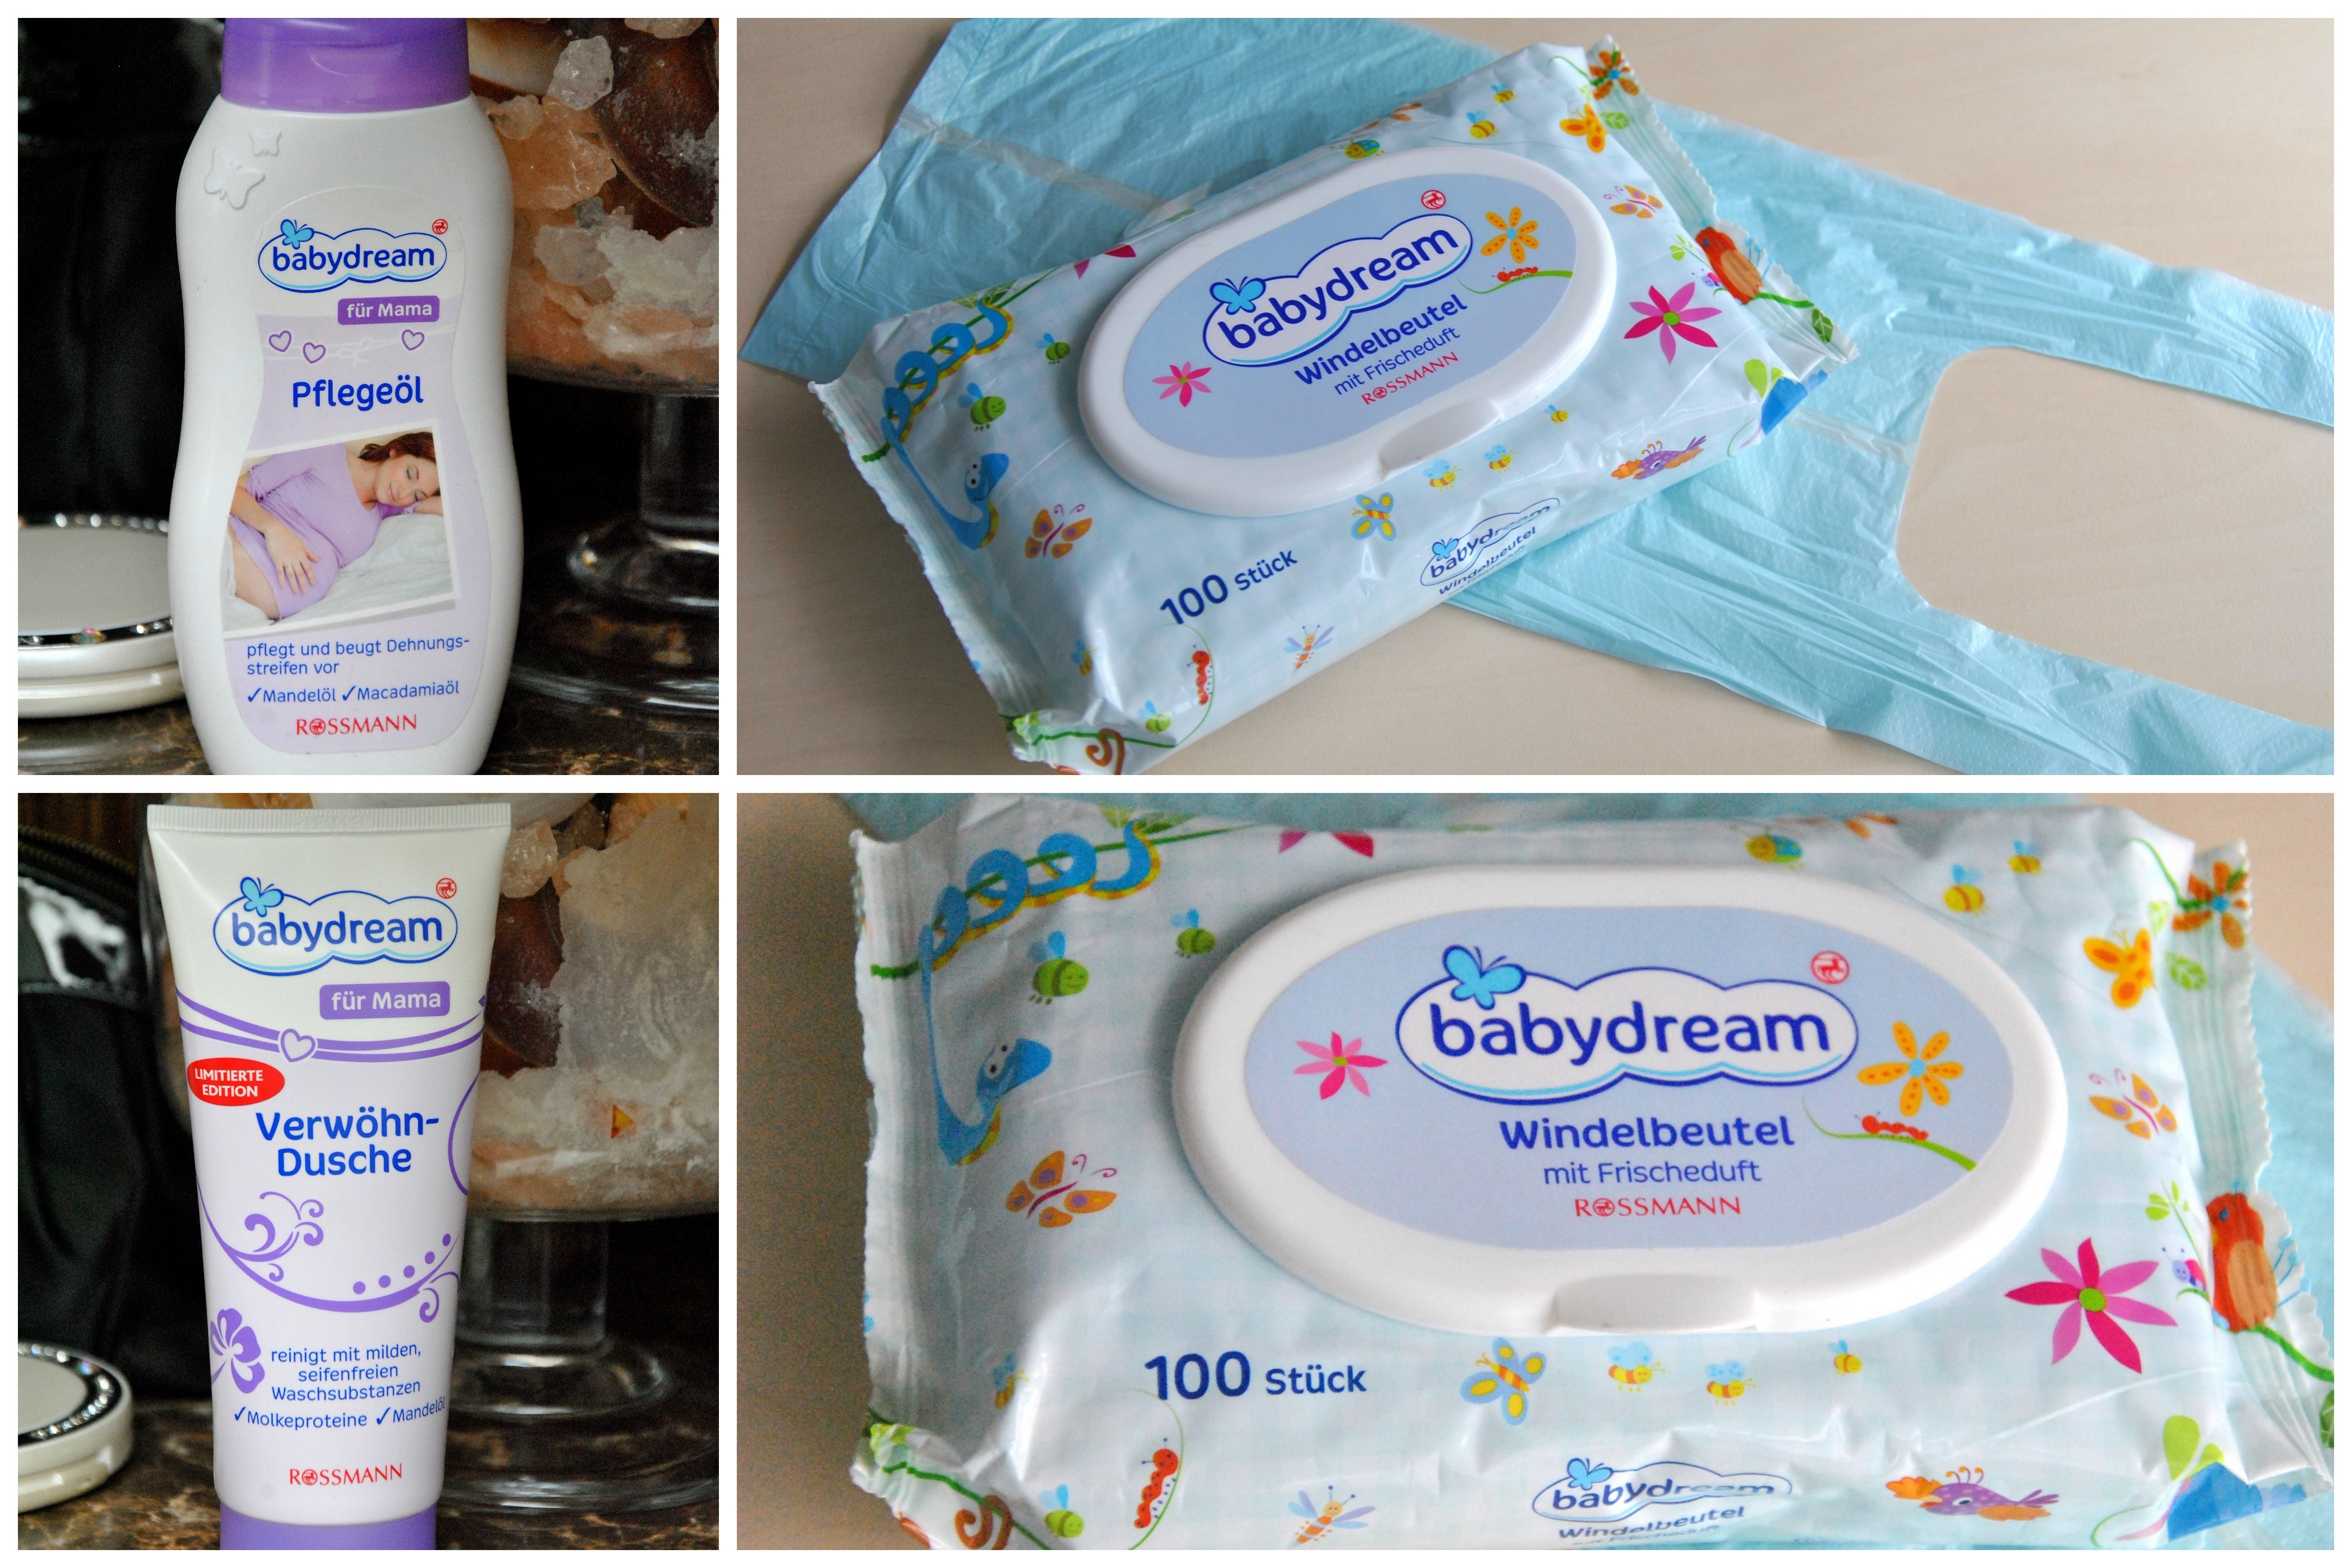 natural clean pampers